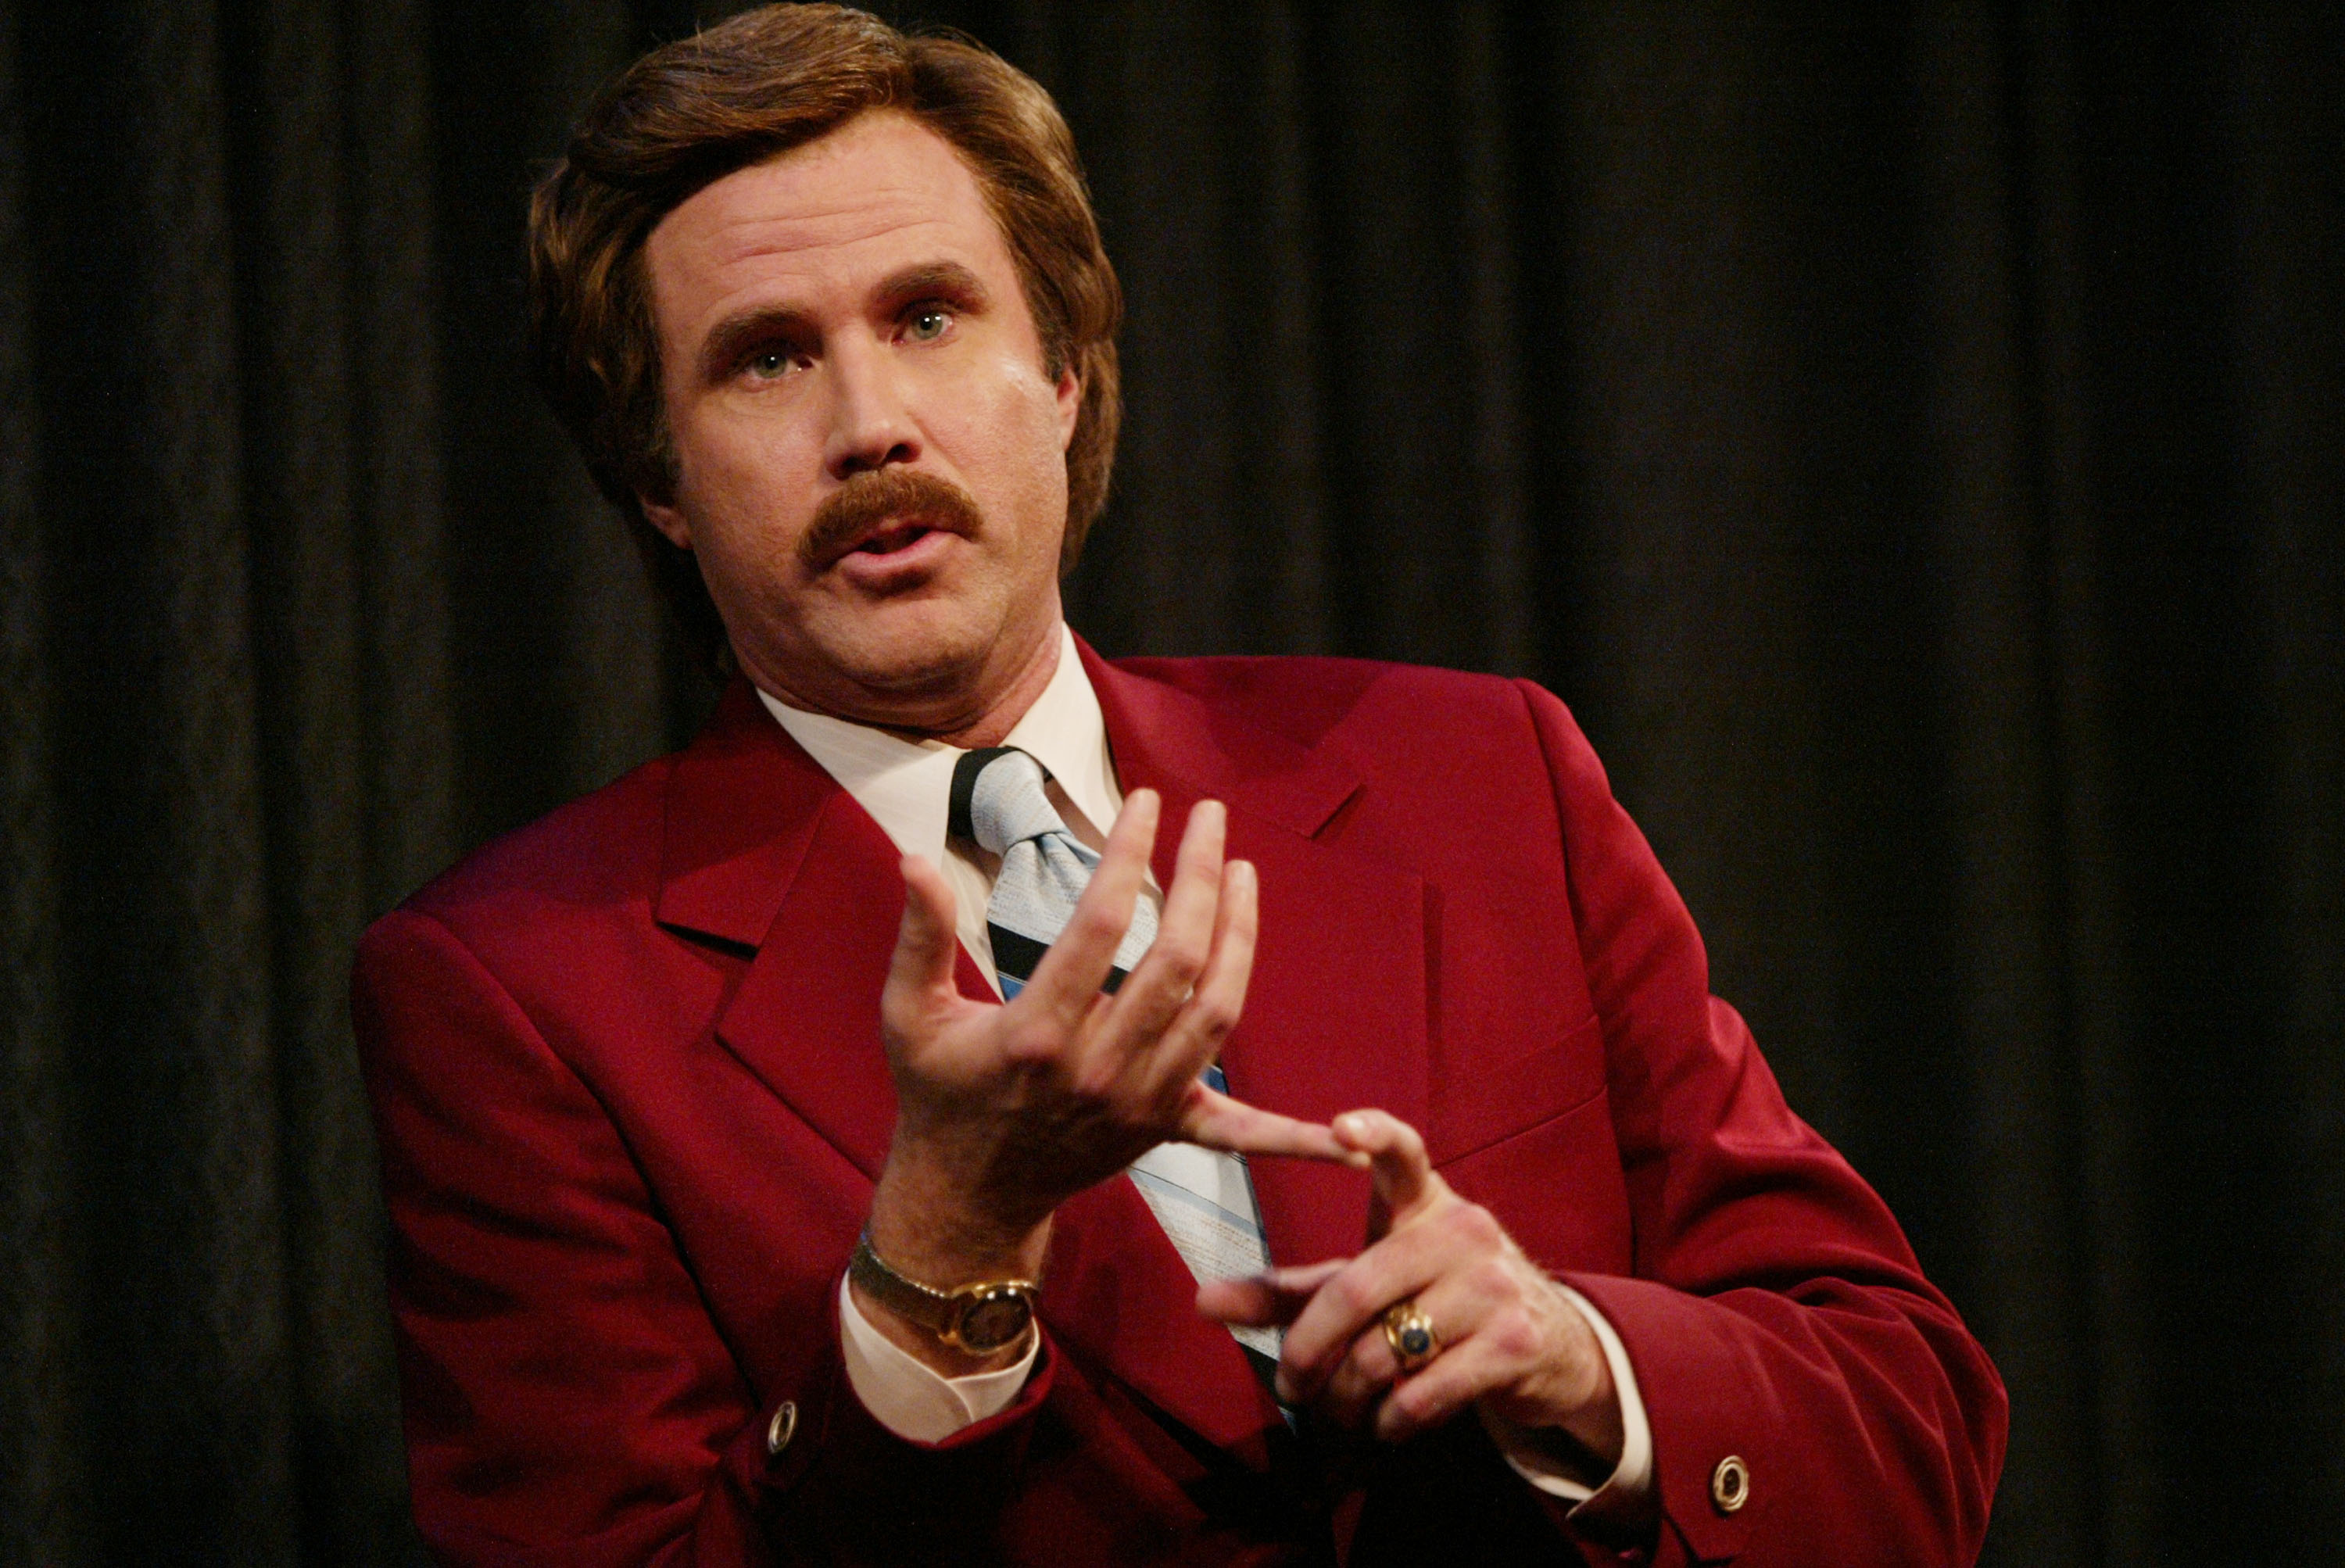 Ron Burgundy attempts to answer the question, “What in the hell is diversity?”